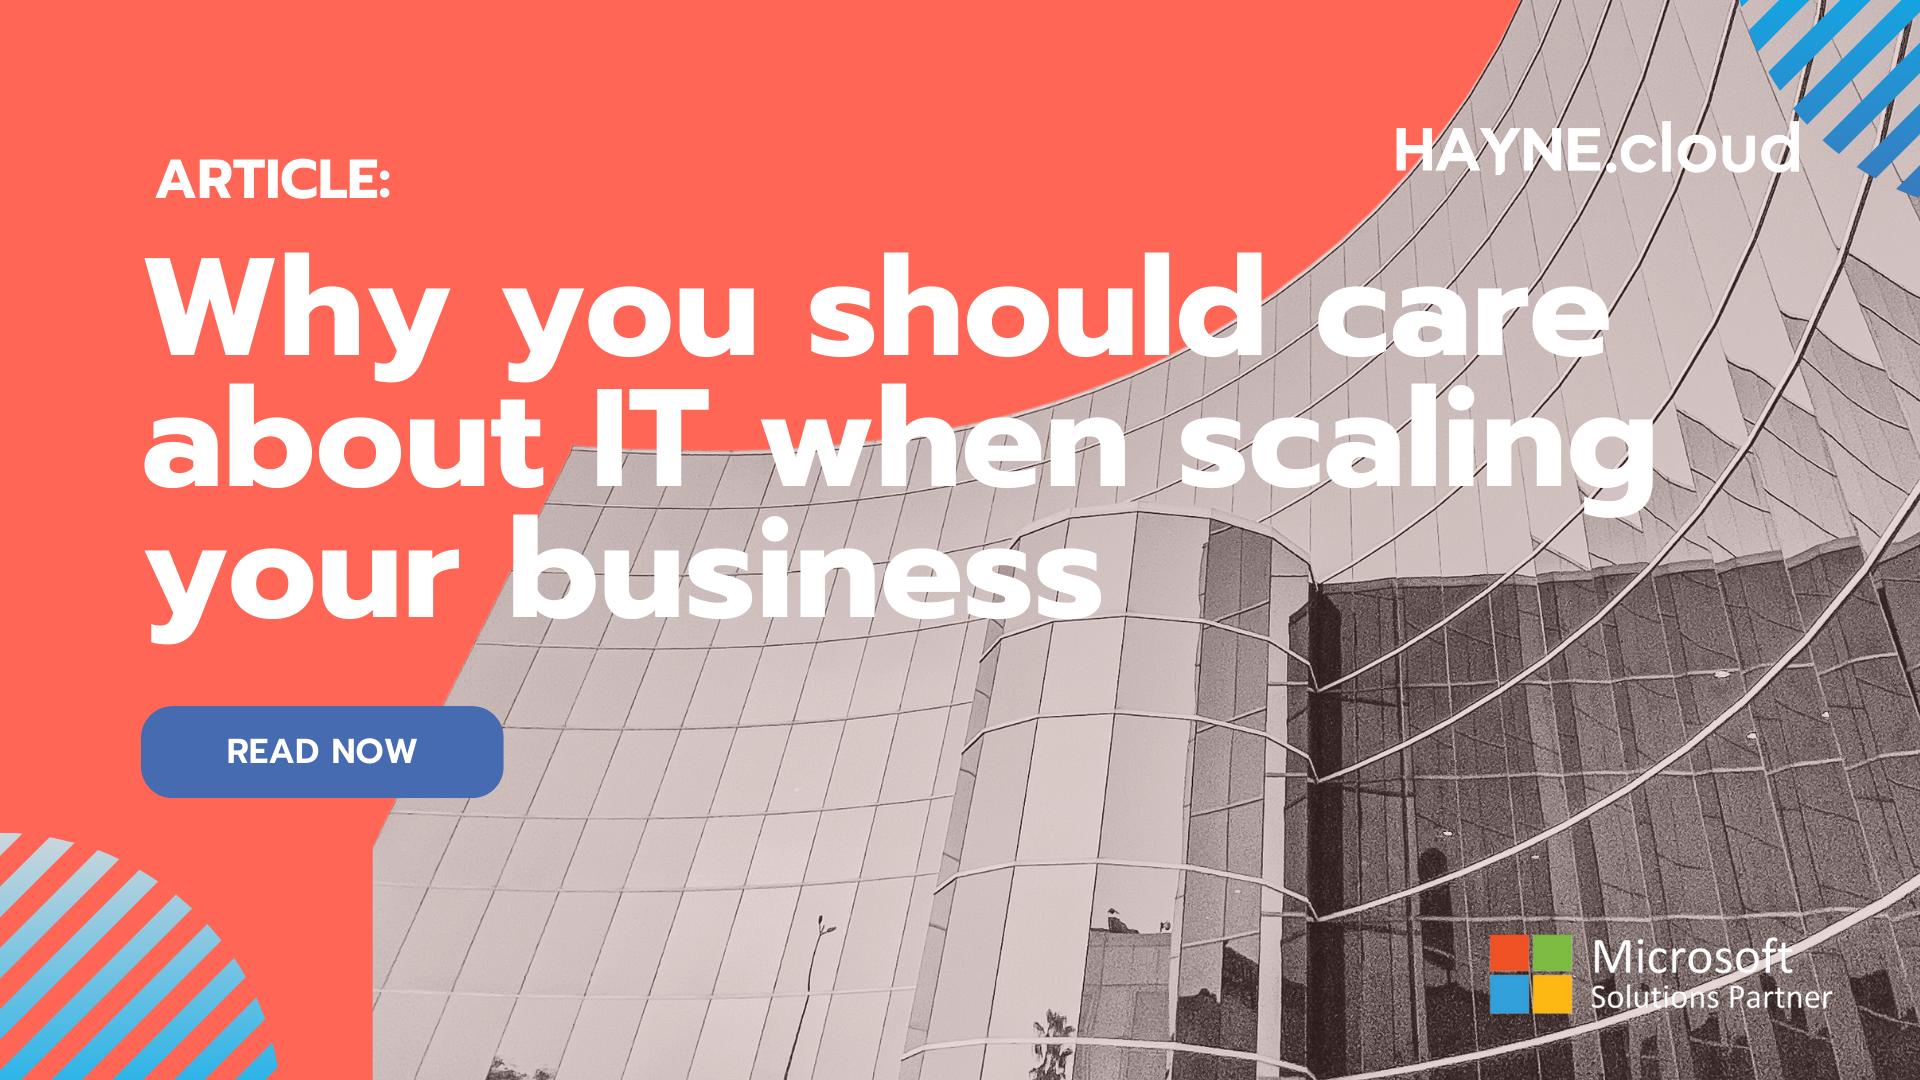 Why you should care about IT when scaling your business